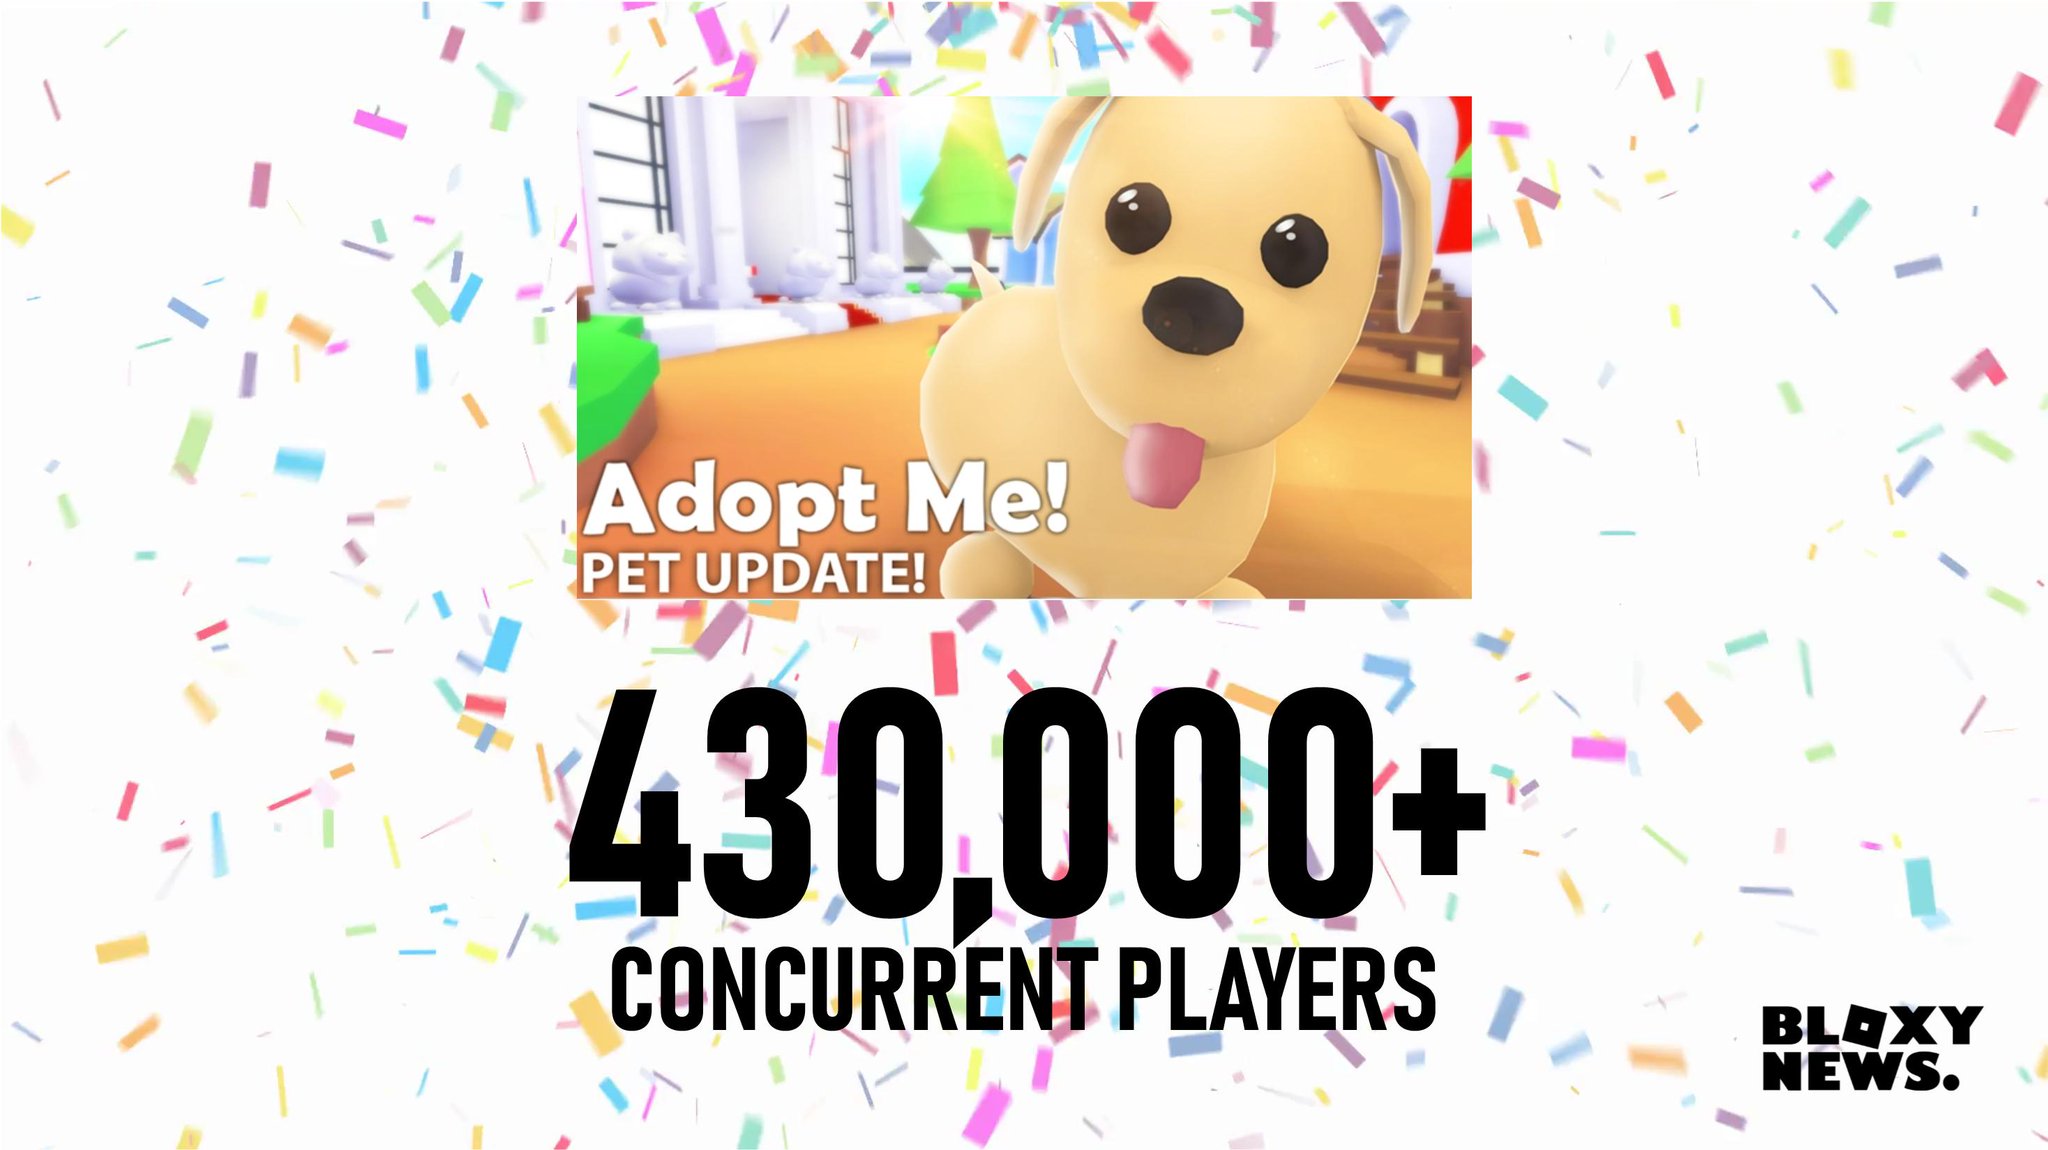 Bloxy News On Twitter Bloxynews Huge Congratulations To Bethink Rbx And The Adopt Me Team For Reaching A Peak Of Over 430 000 Players Playing The Game At The Same Time That S - bloxy news on twitter even valkyries need a break get the new summer valk for r 25 000 for the roblox labordaysale https t co c0ojmh9zoi https t co xhfmszabx3